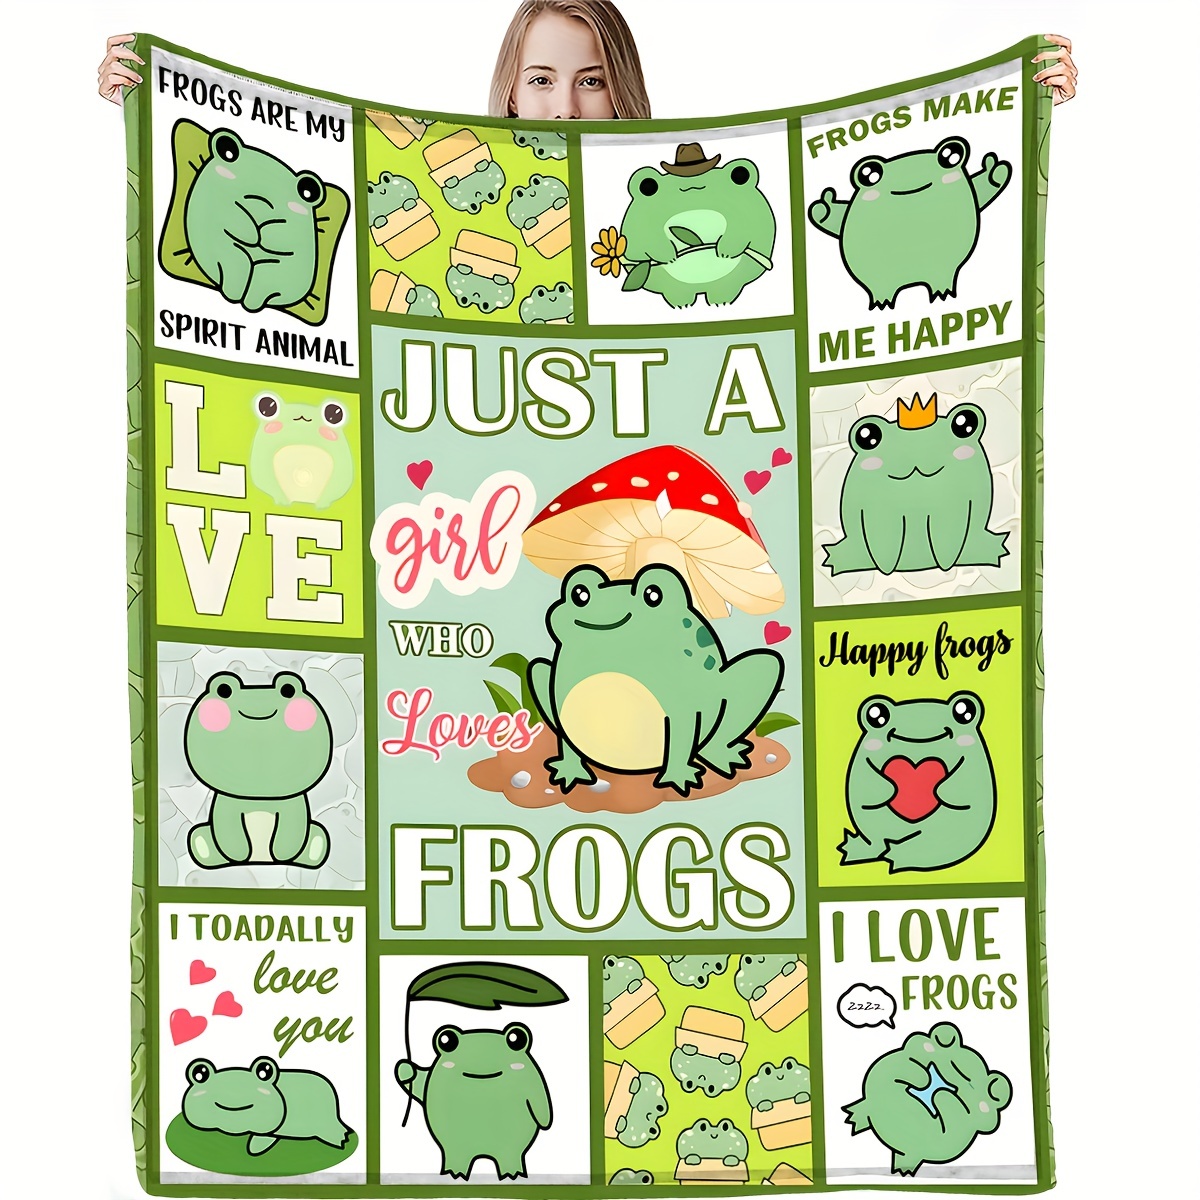 Aimego Frog Blanket Gifts for Women Kids, Cute Frogs Stuff Decor Throw for Frog Lovers Soft Plush Lightweight Fleece Cozy Couch Bedroom Animal